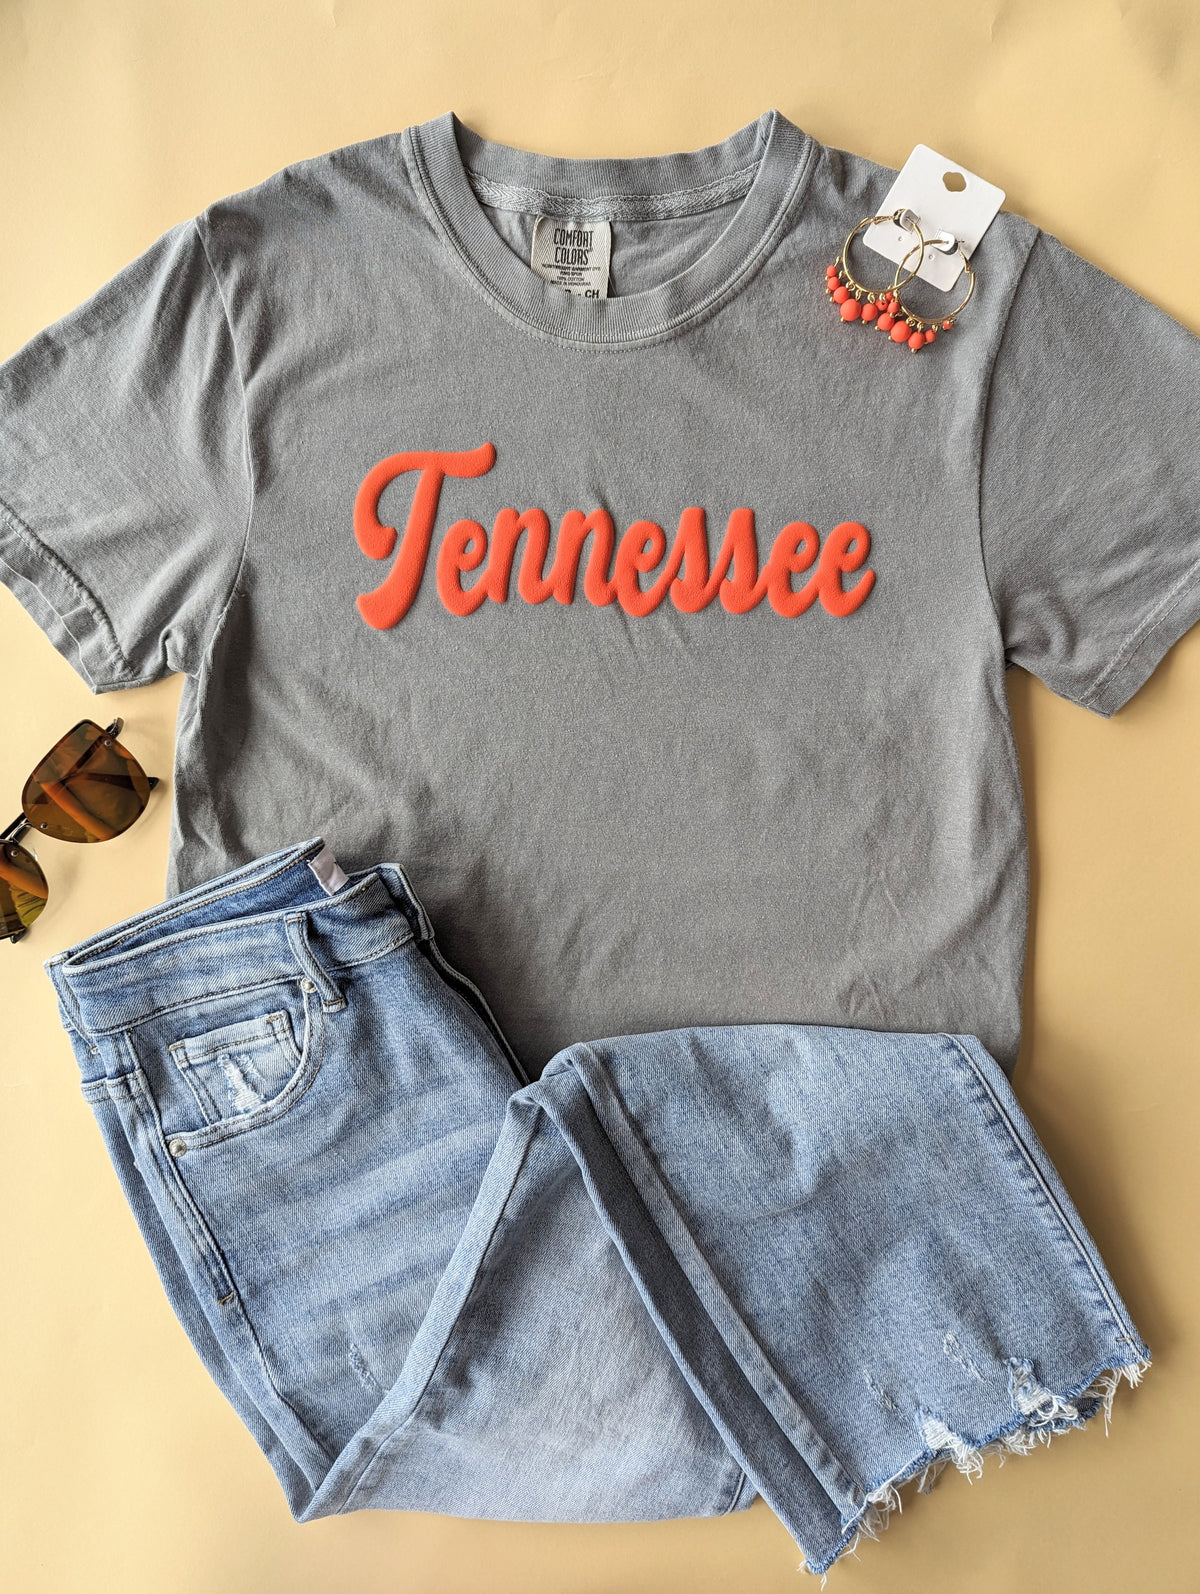 Tennessee Puffy Graphic Tee